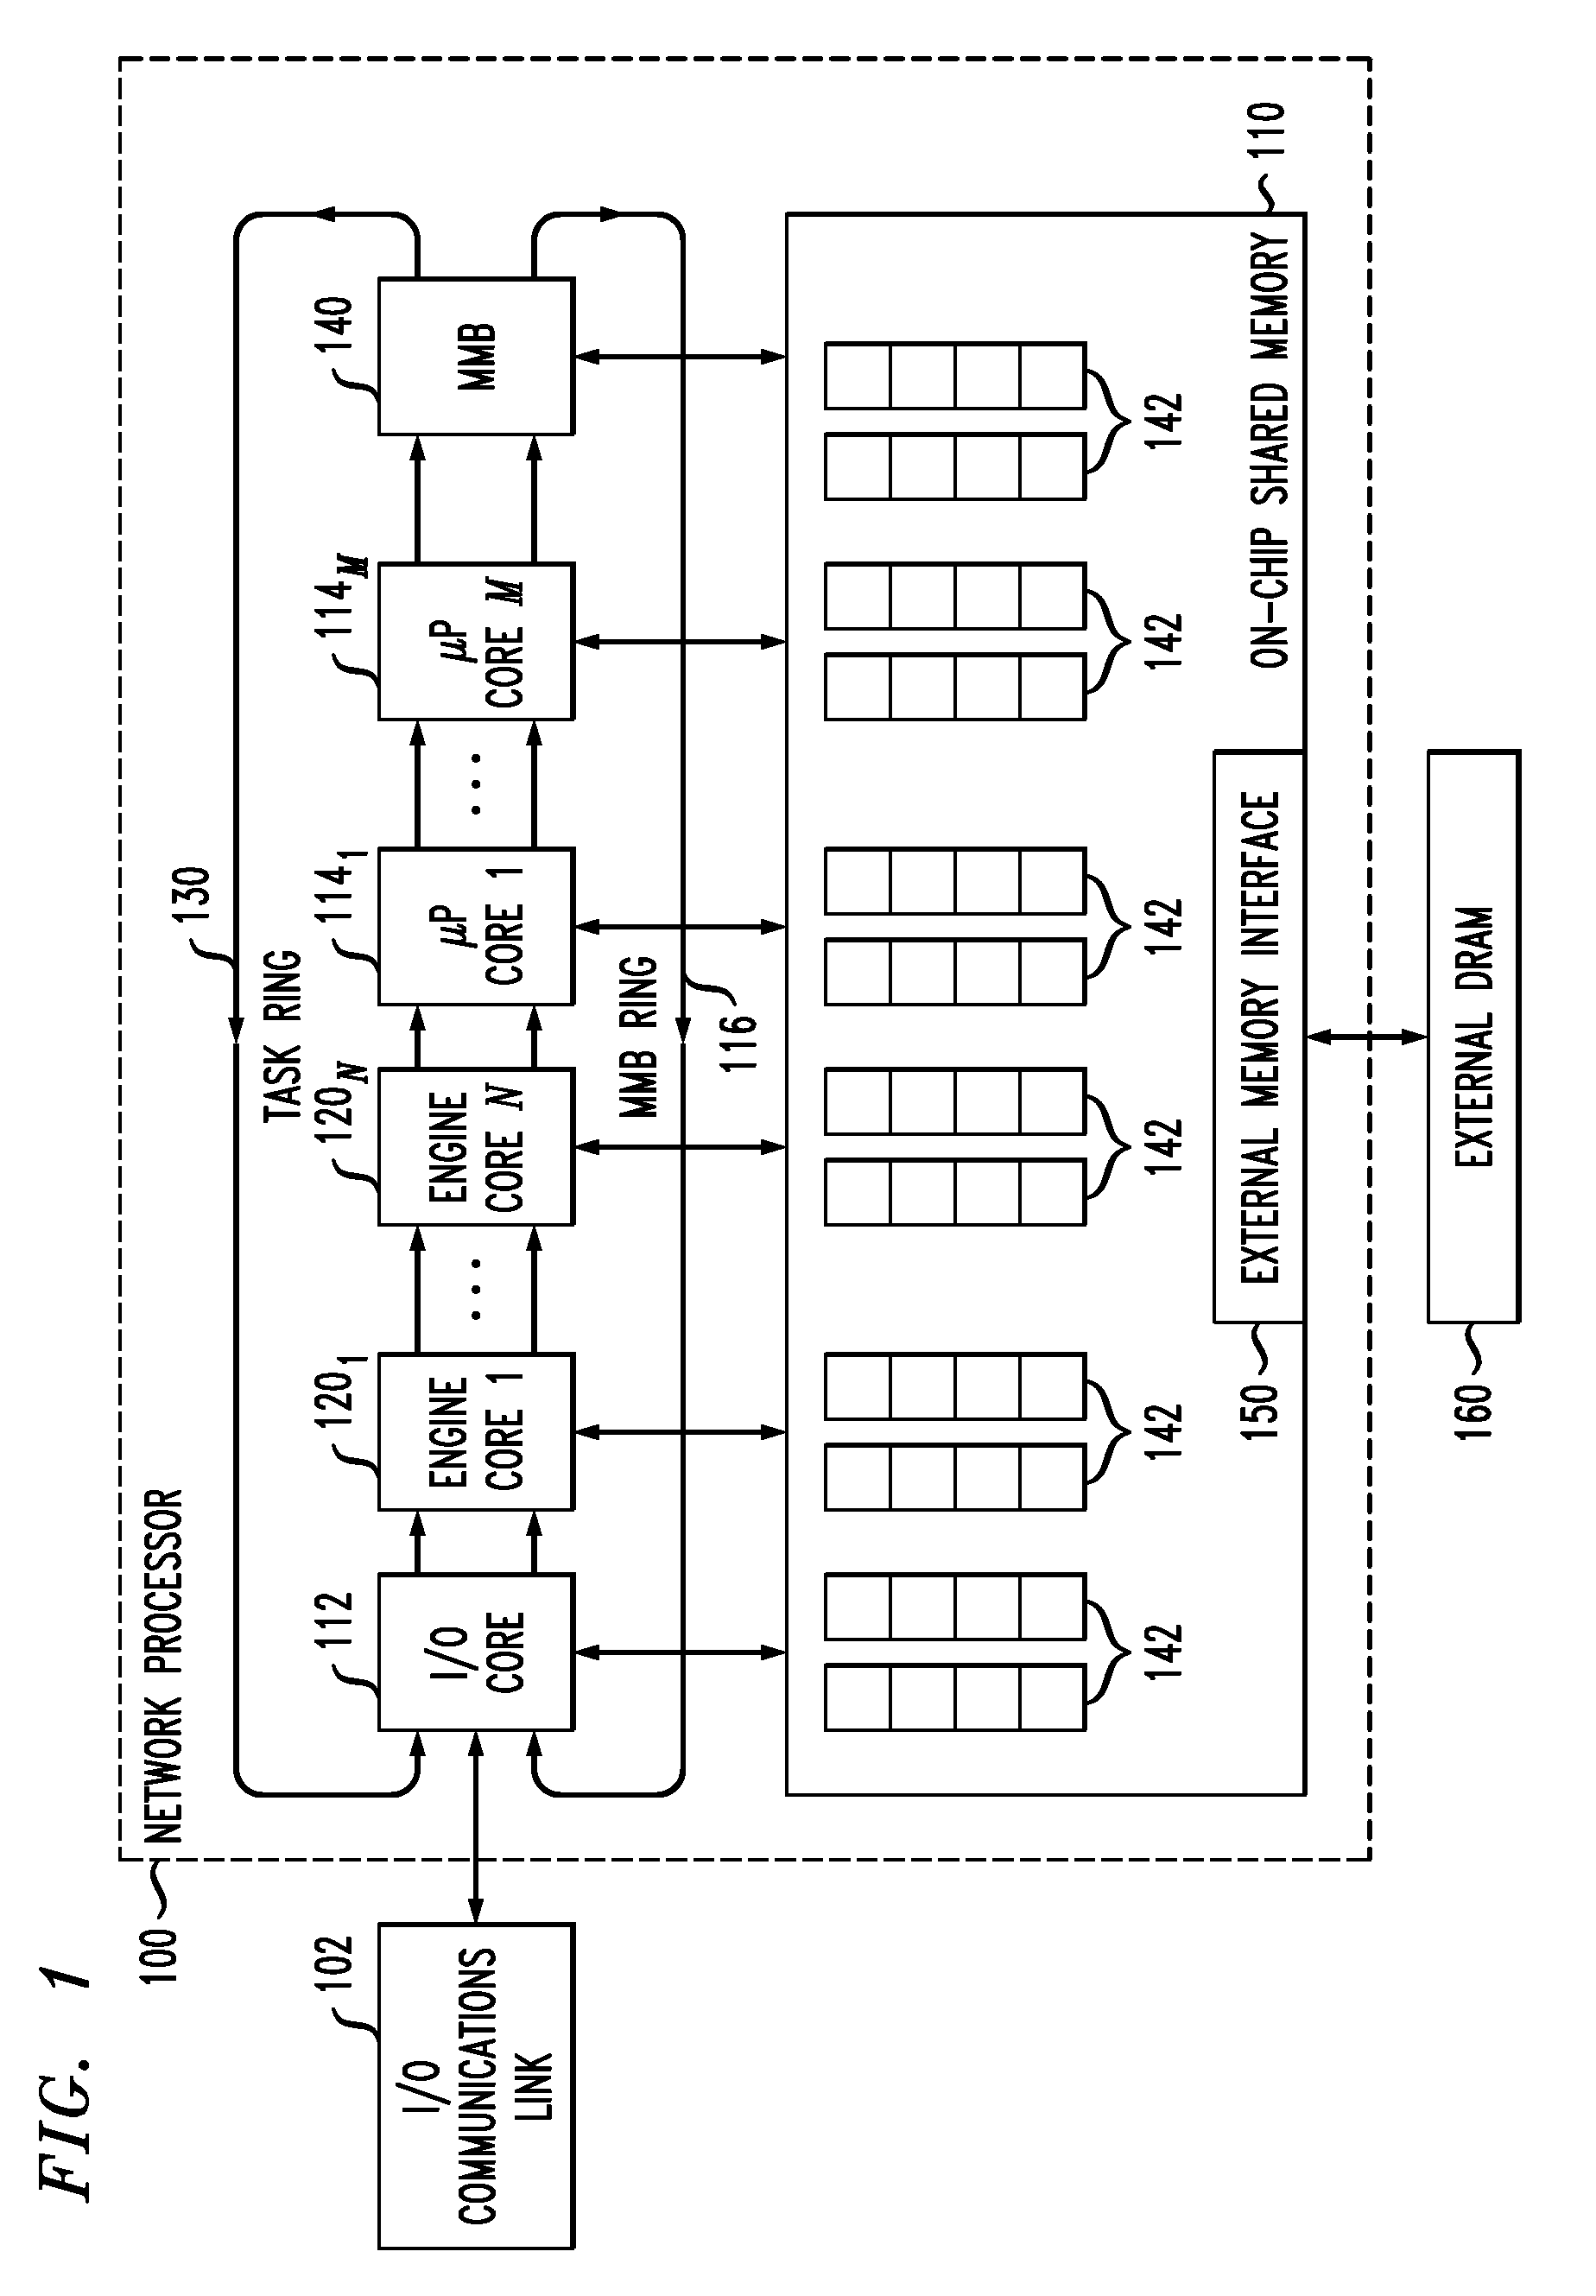 Network communications processor architecture with memory load balancing